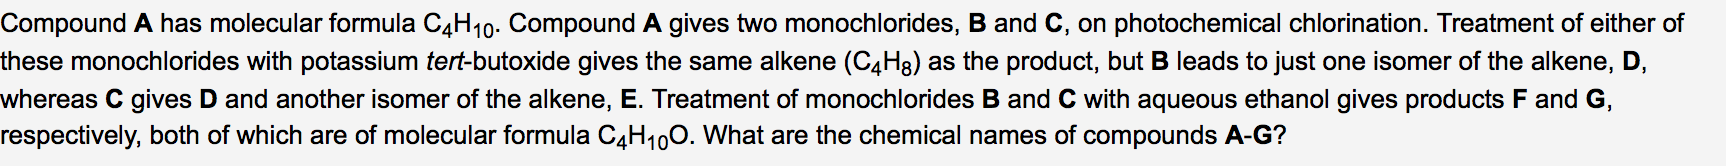 Compound A has molecular formula C4H10. Compound A gives two monochlorides, B and C, on photochemical chlorination. Treatment of either of
these monochlorides with potassium tert-butoxide gives the same alkene (C4H8) as the product, but B leads to just one isomer of the alkene, D,
whereas C gives D and another isomer of the alkene, E. Treatment of monochlorides B and C with aqueous ethanol gives products F and G,
respectively, both of which are of molecular formula C4H100. What are the chemical names of compounds A-G?
